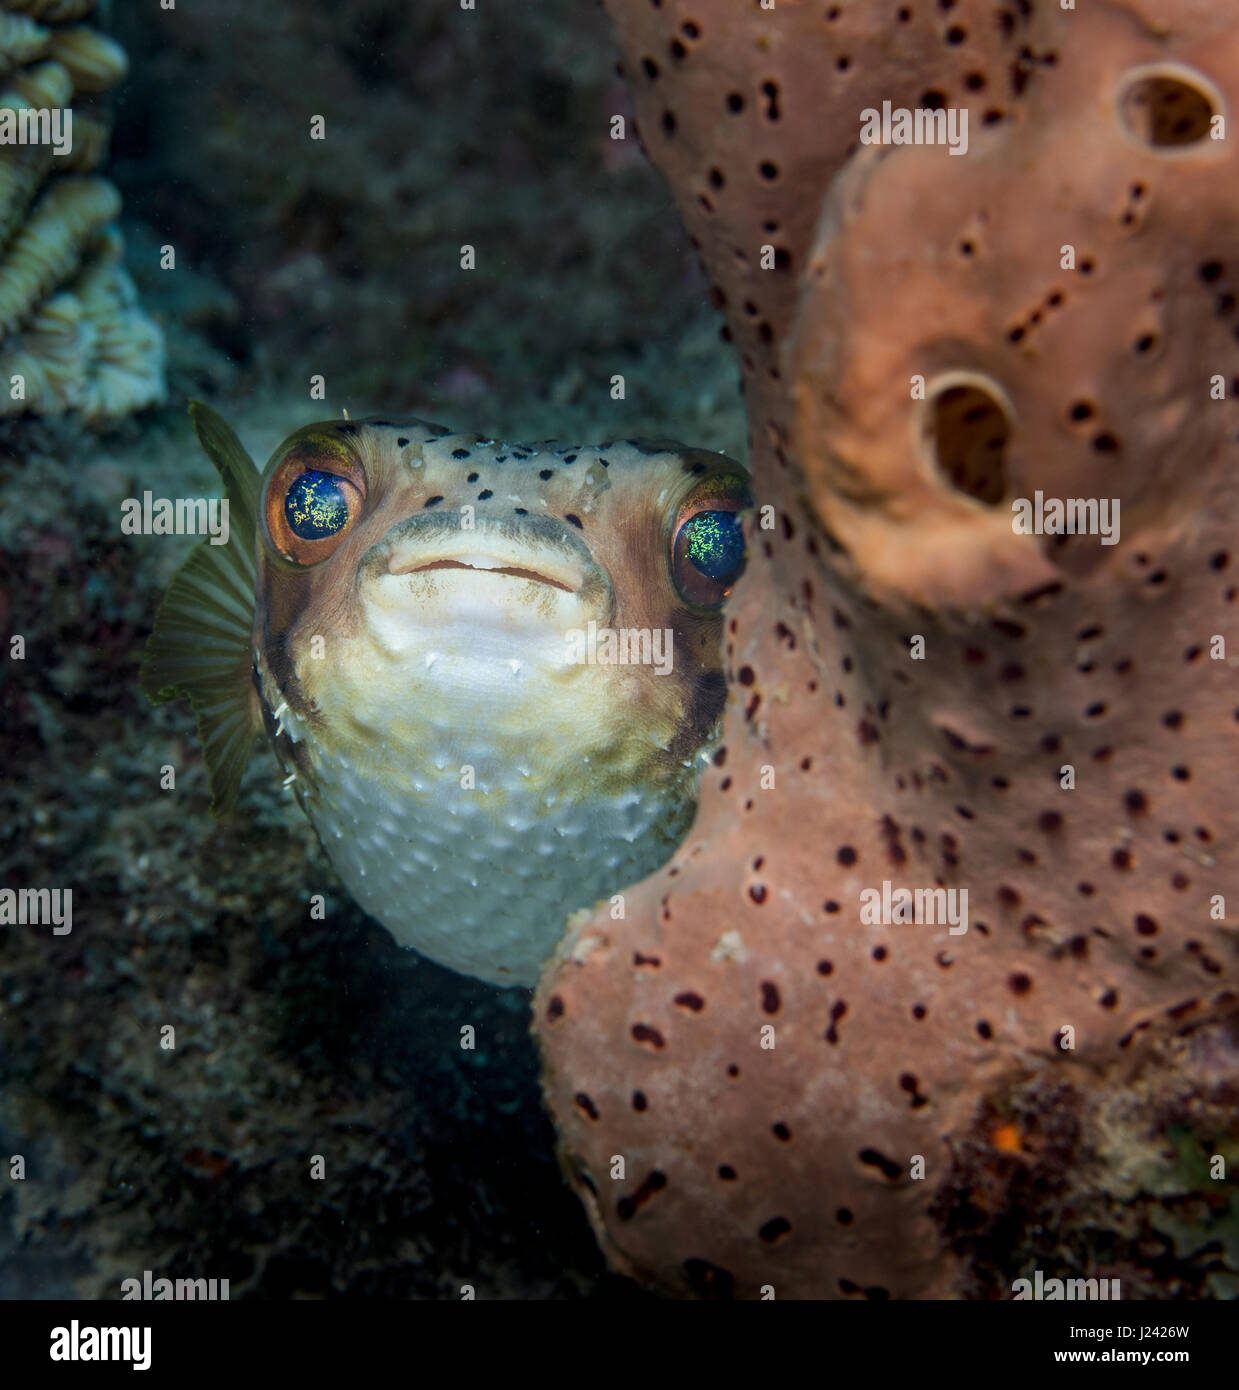 The opaline eyes of a Balloonfish are visible as it peers around a sponge. Stock Photo